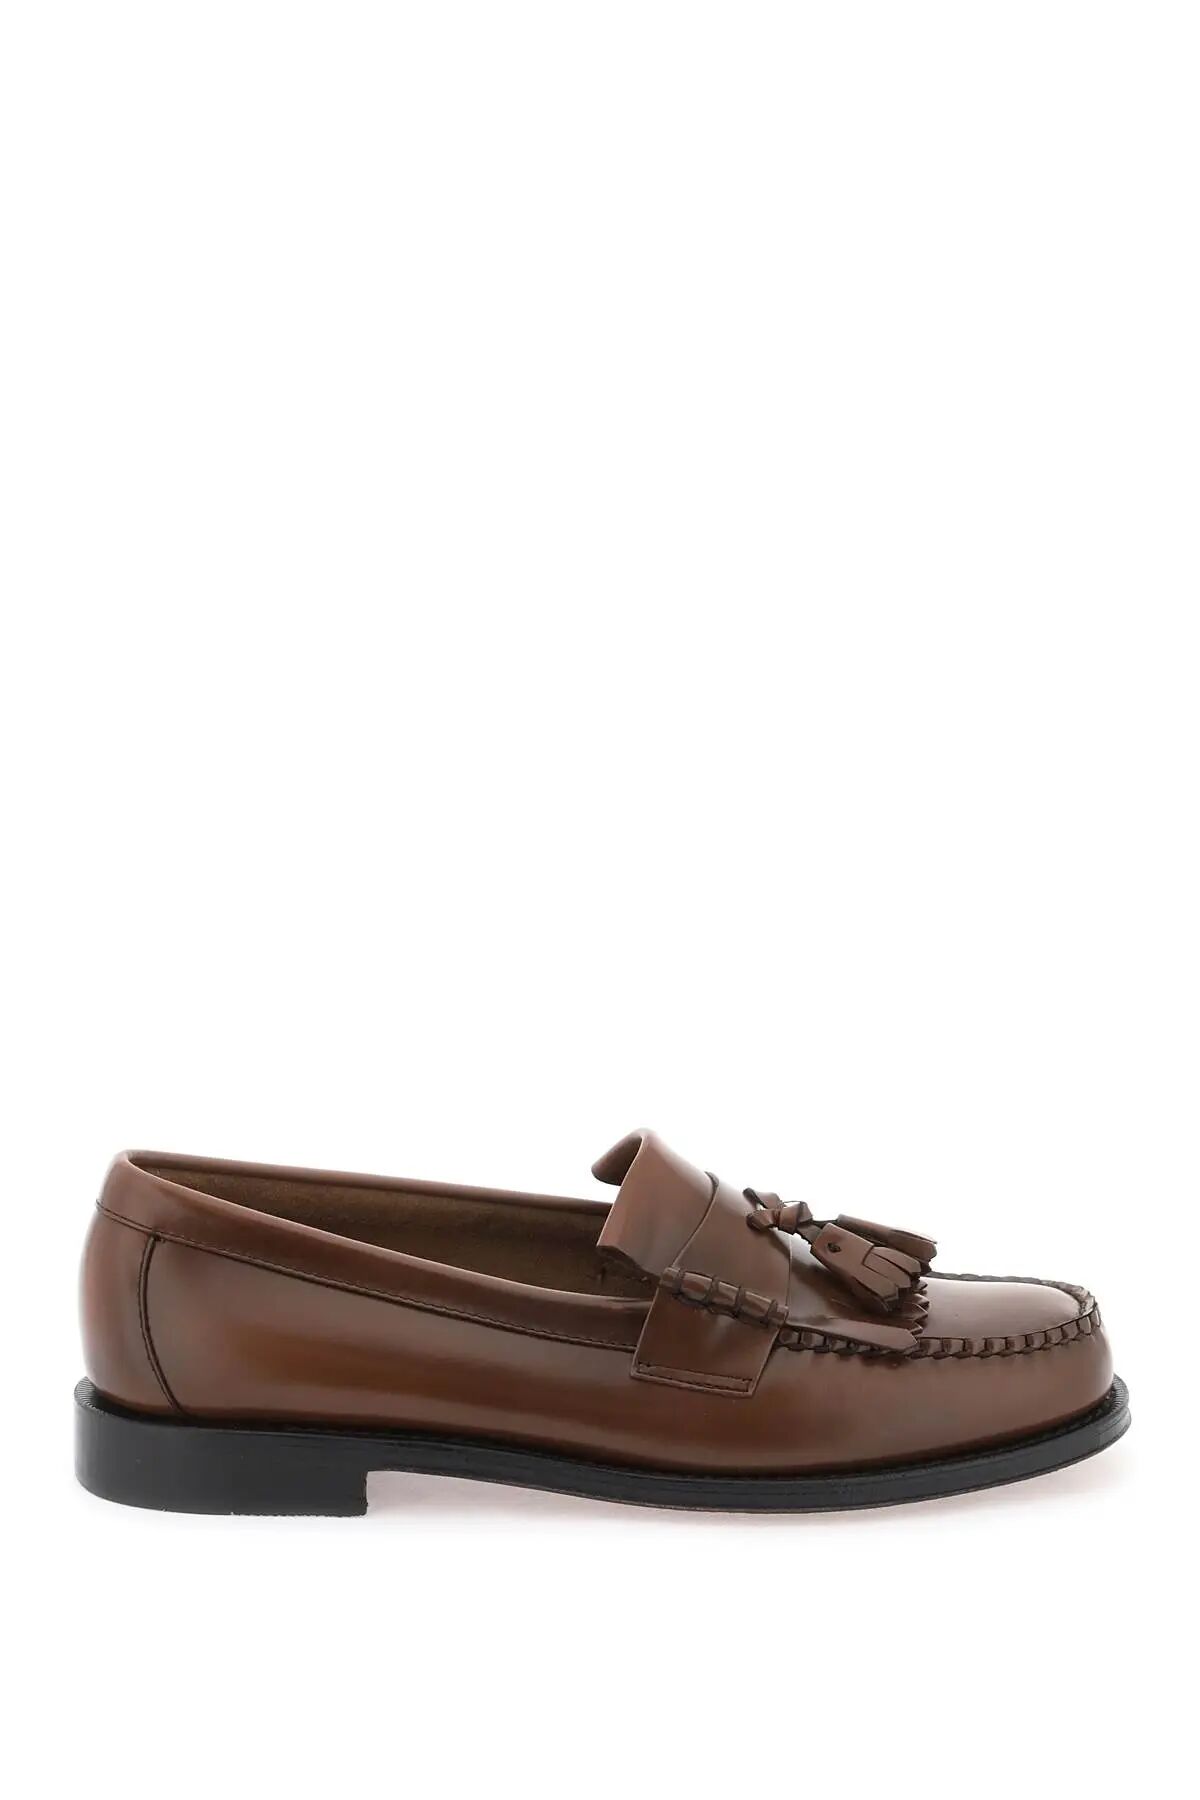 G.H. BASS Esther Kiltie Weejuns loafers  - Brown - male - Size: 42